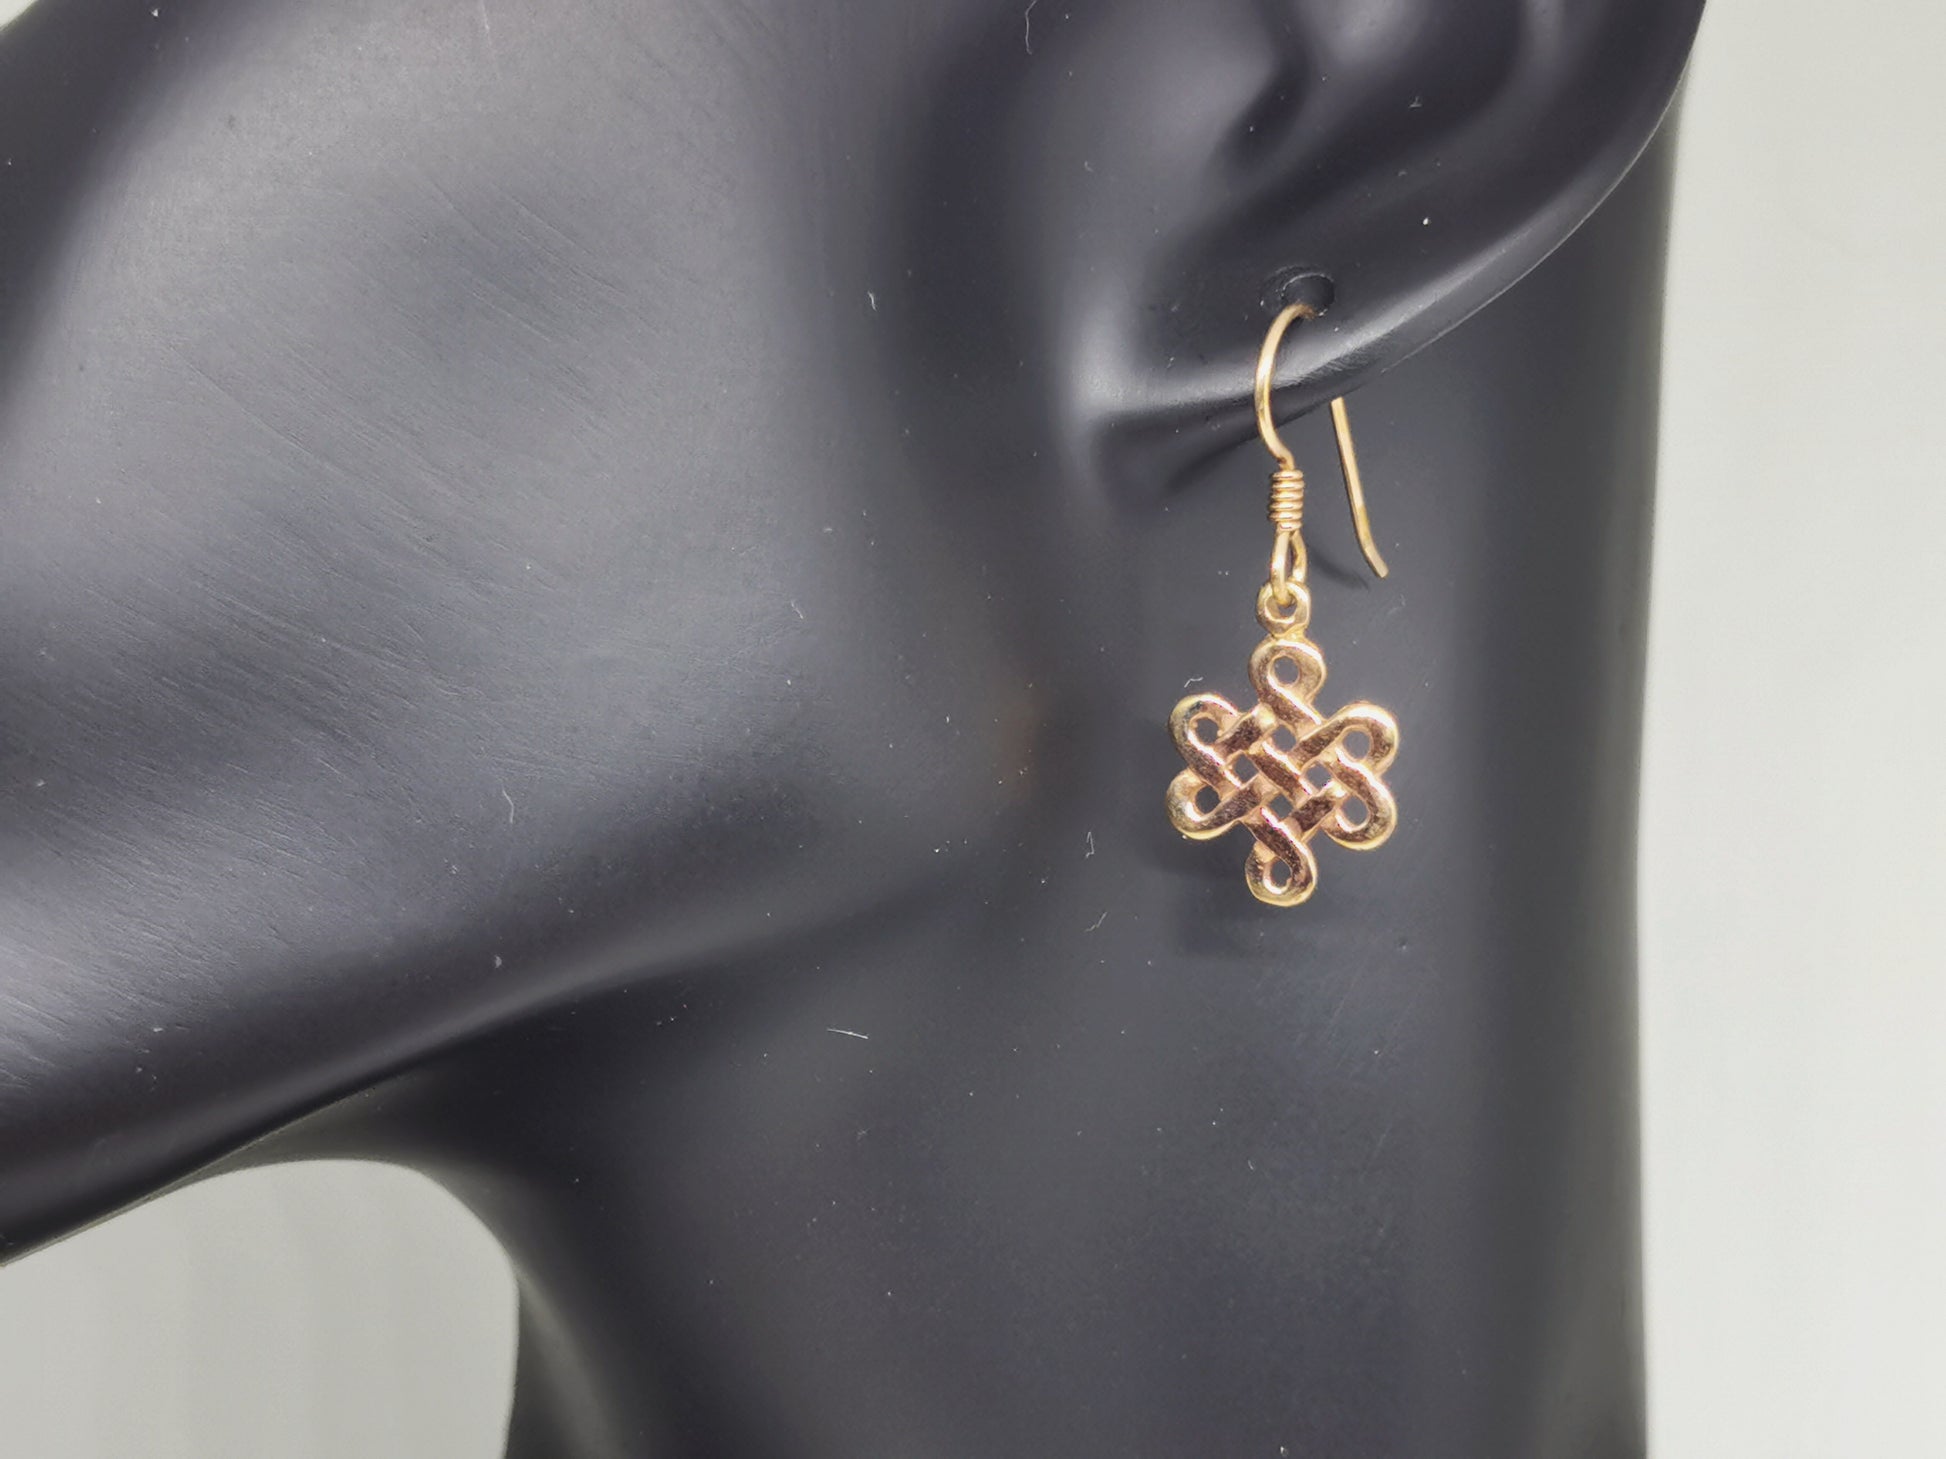 Small Endless Knot Earrings in Sterling Silver or Antique Bronze, Eternal knot Earrings, Shrivatsa Knot Earrings, Celtic Knot Earrings, Bronze Endless Knot Earrings, Small Knot Earrings In Bronze, Celtic Knot Earrings, Celtic Bronze Jewellery